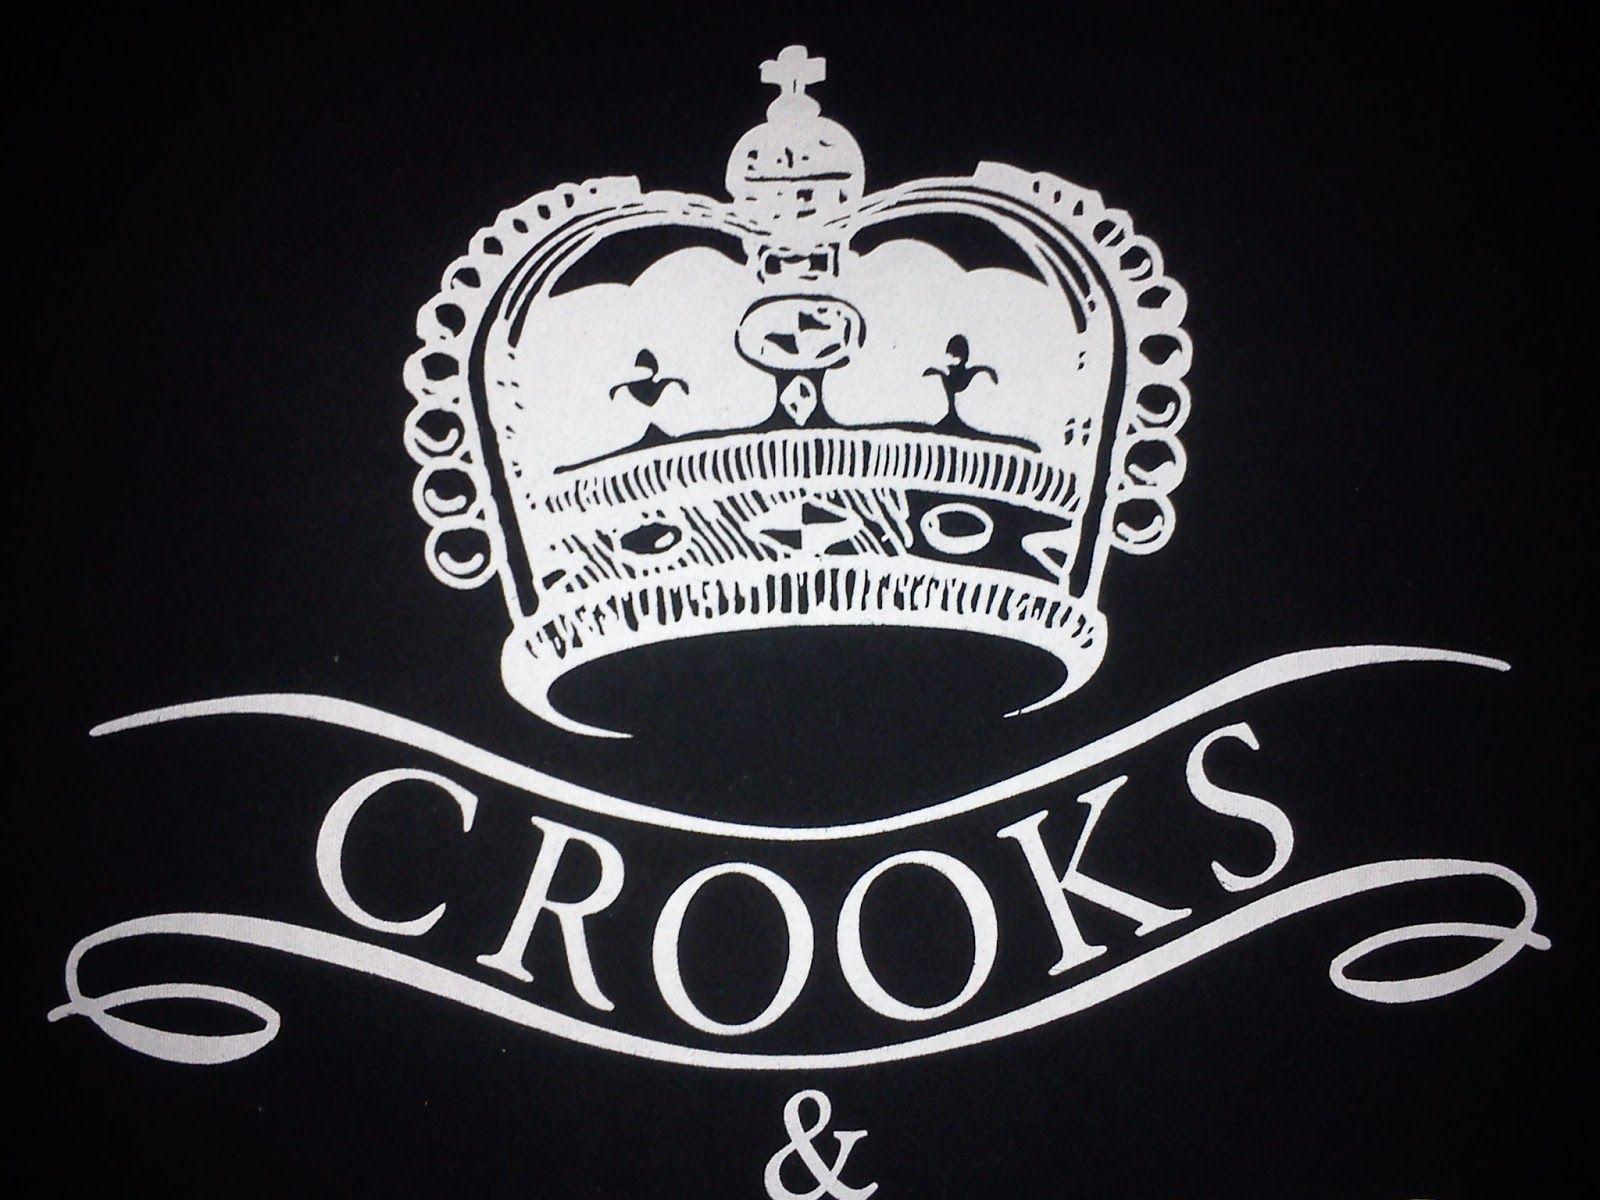 Crooks and Castles Logo - Crooks And Castles Wallpapers - Wallpaper Cave